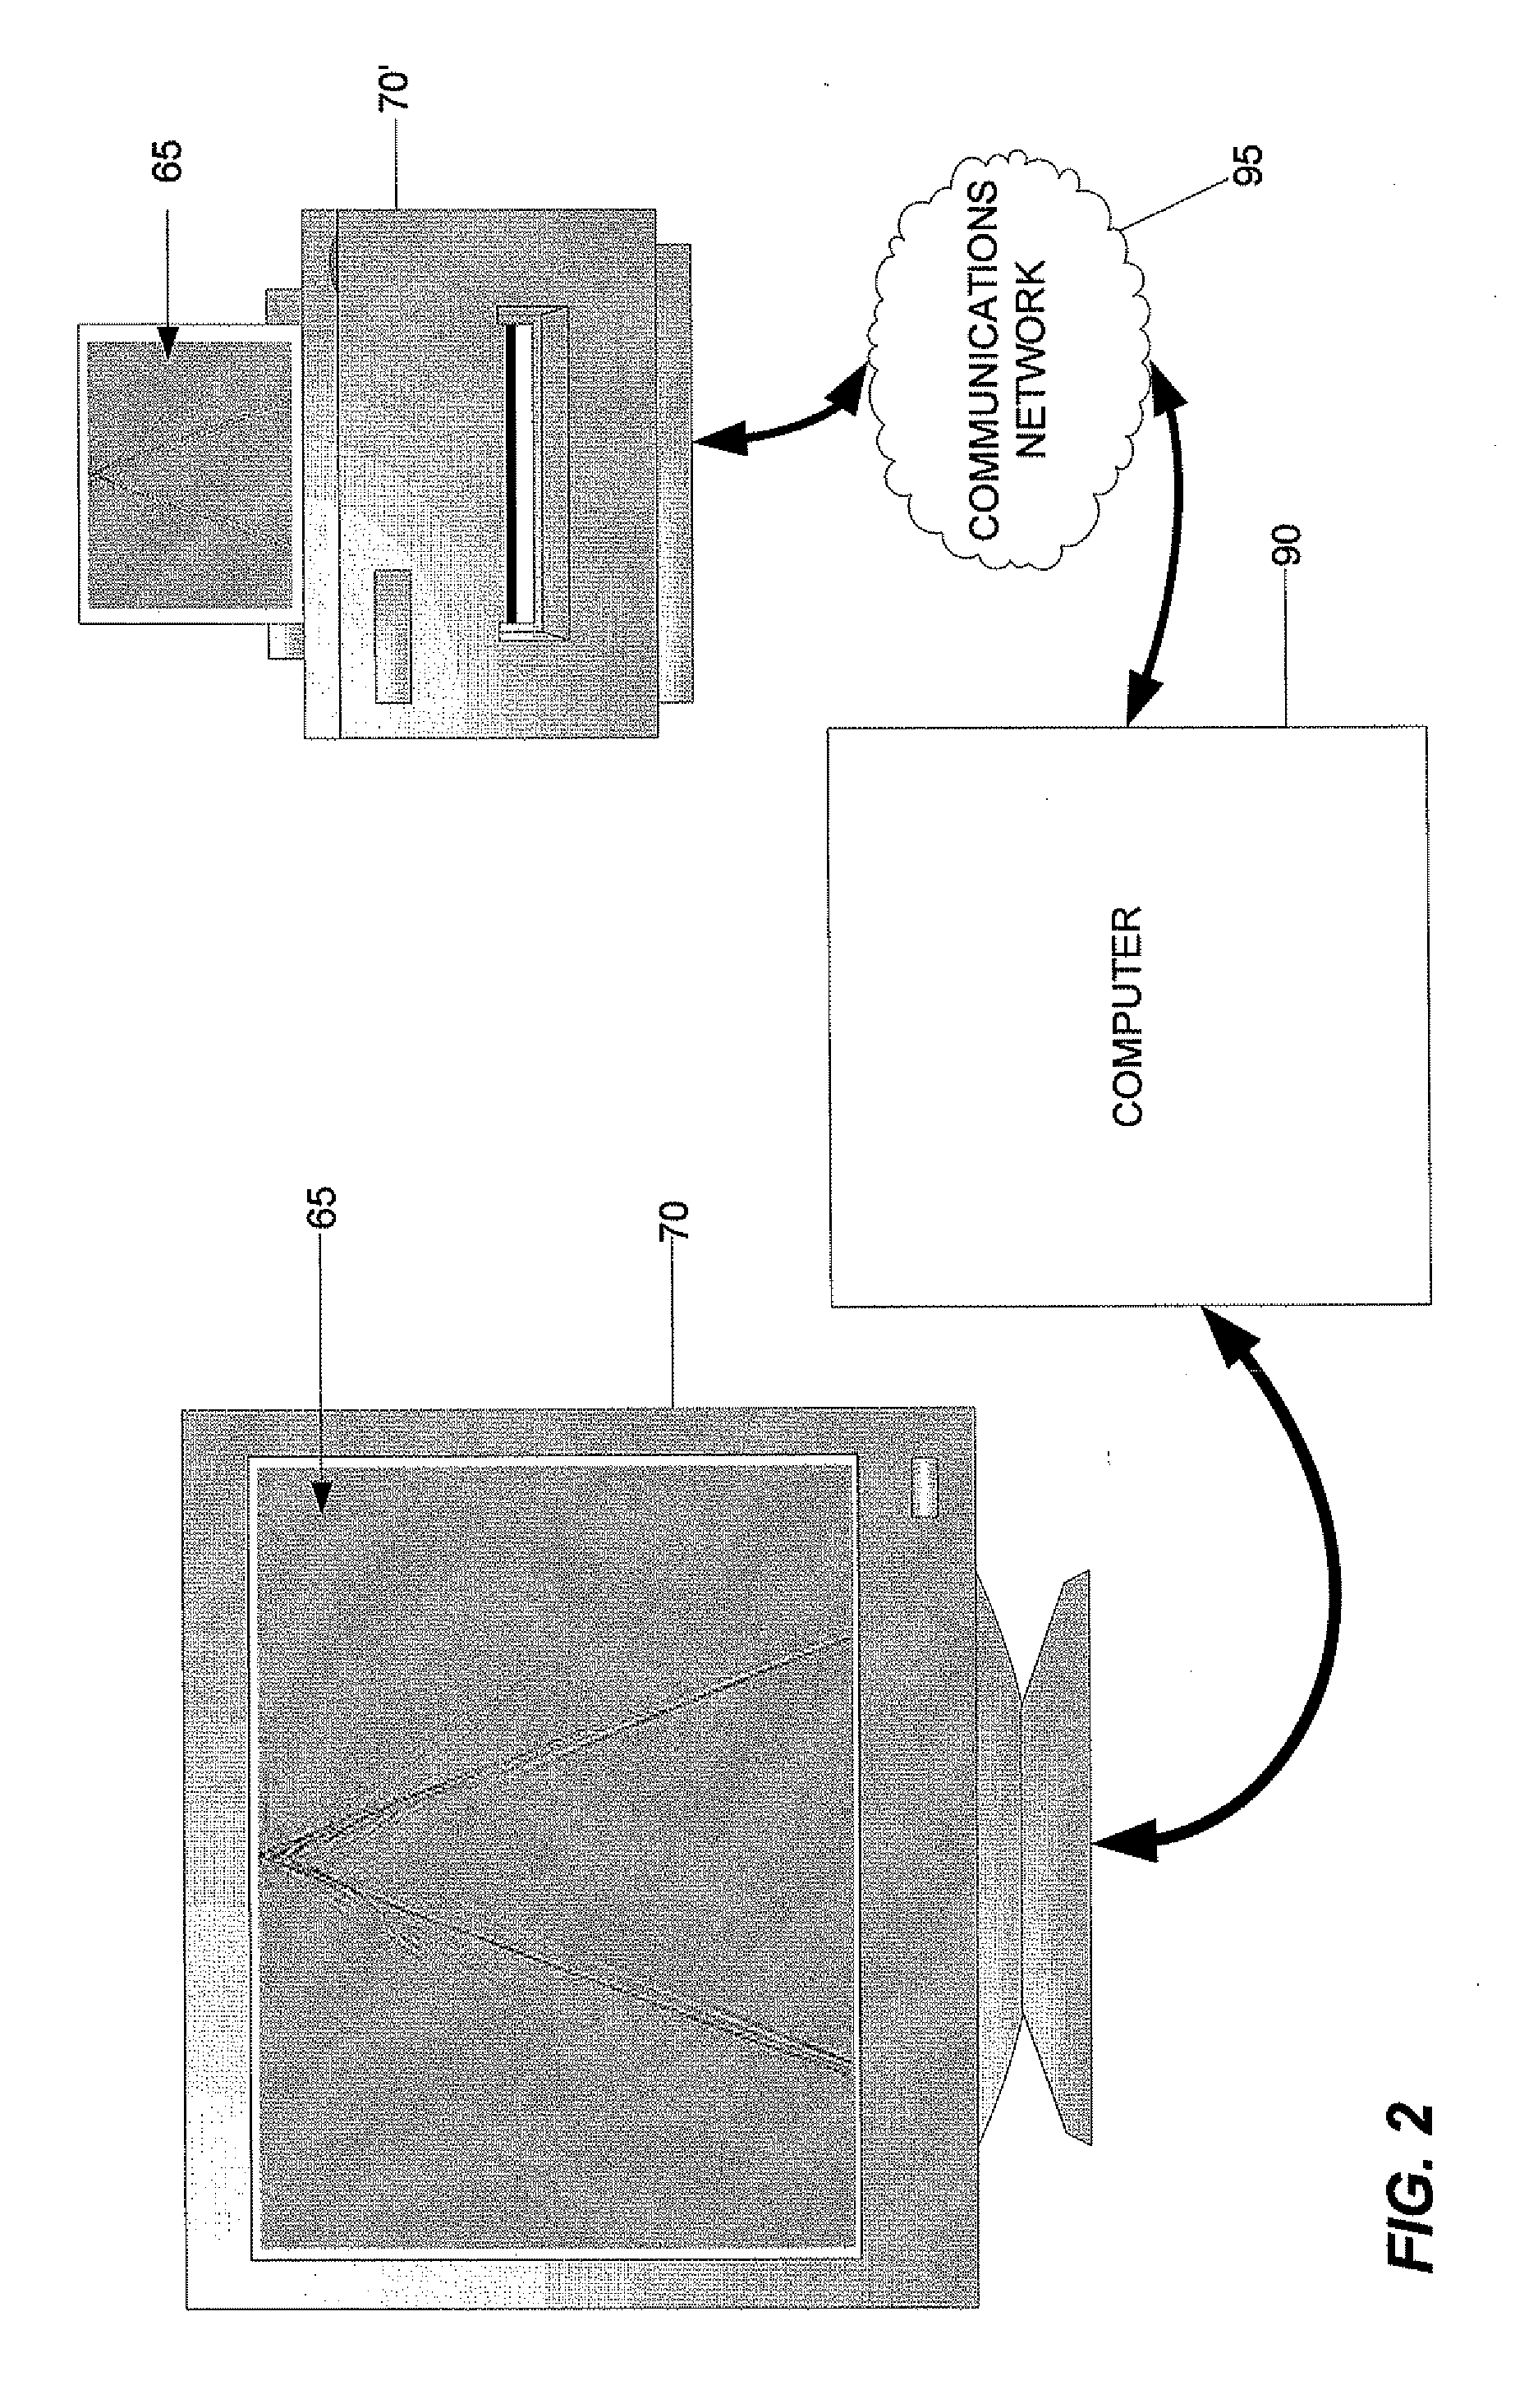 Seismic Image Filtering Machine To Generate A Filtered Seismic Image, Program Products, And Related Methods